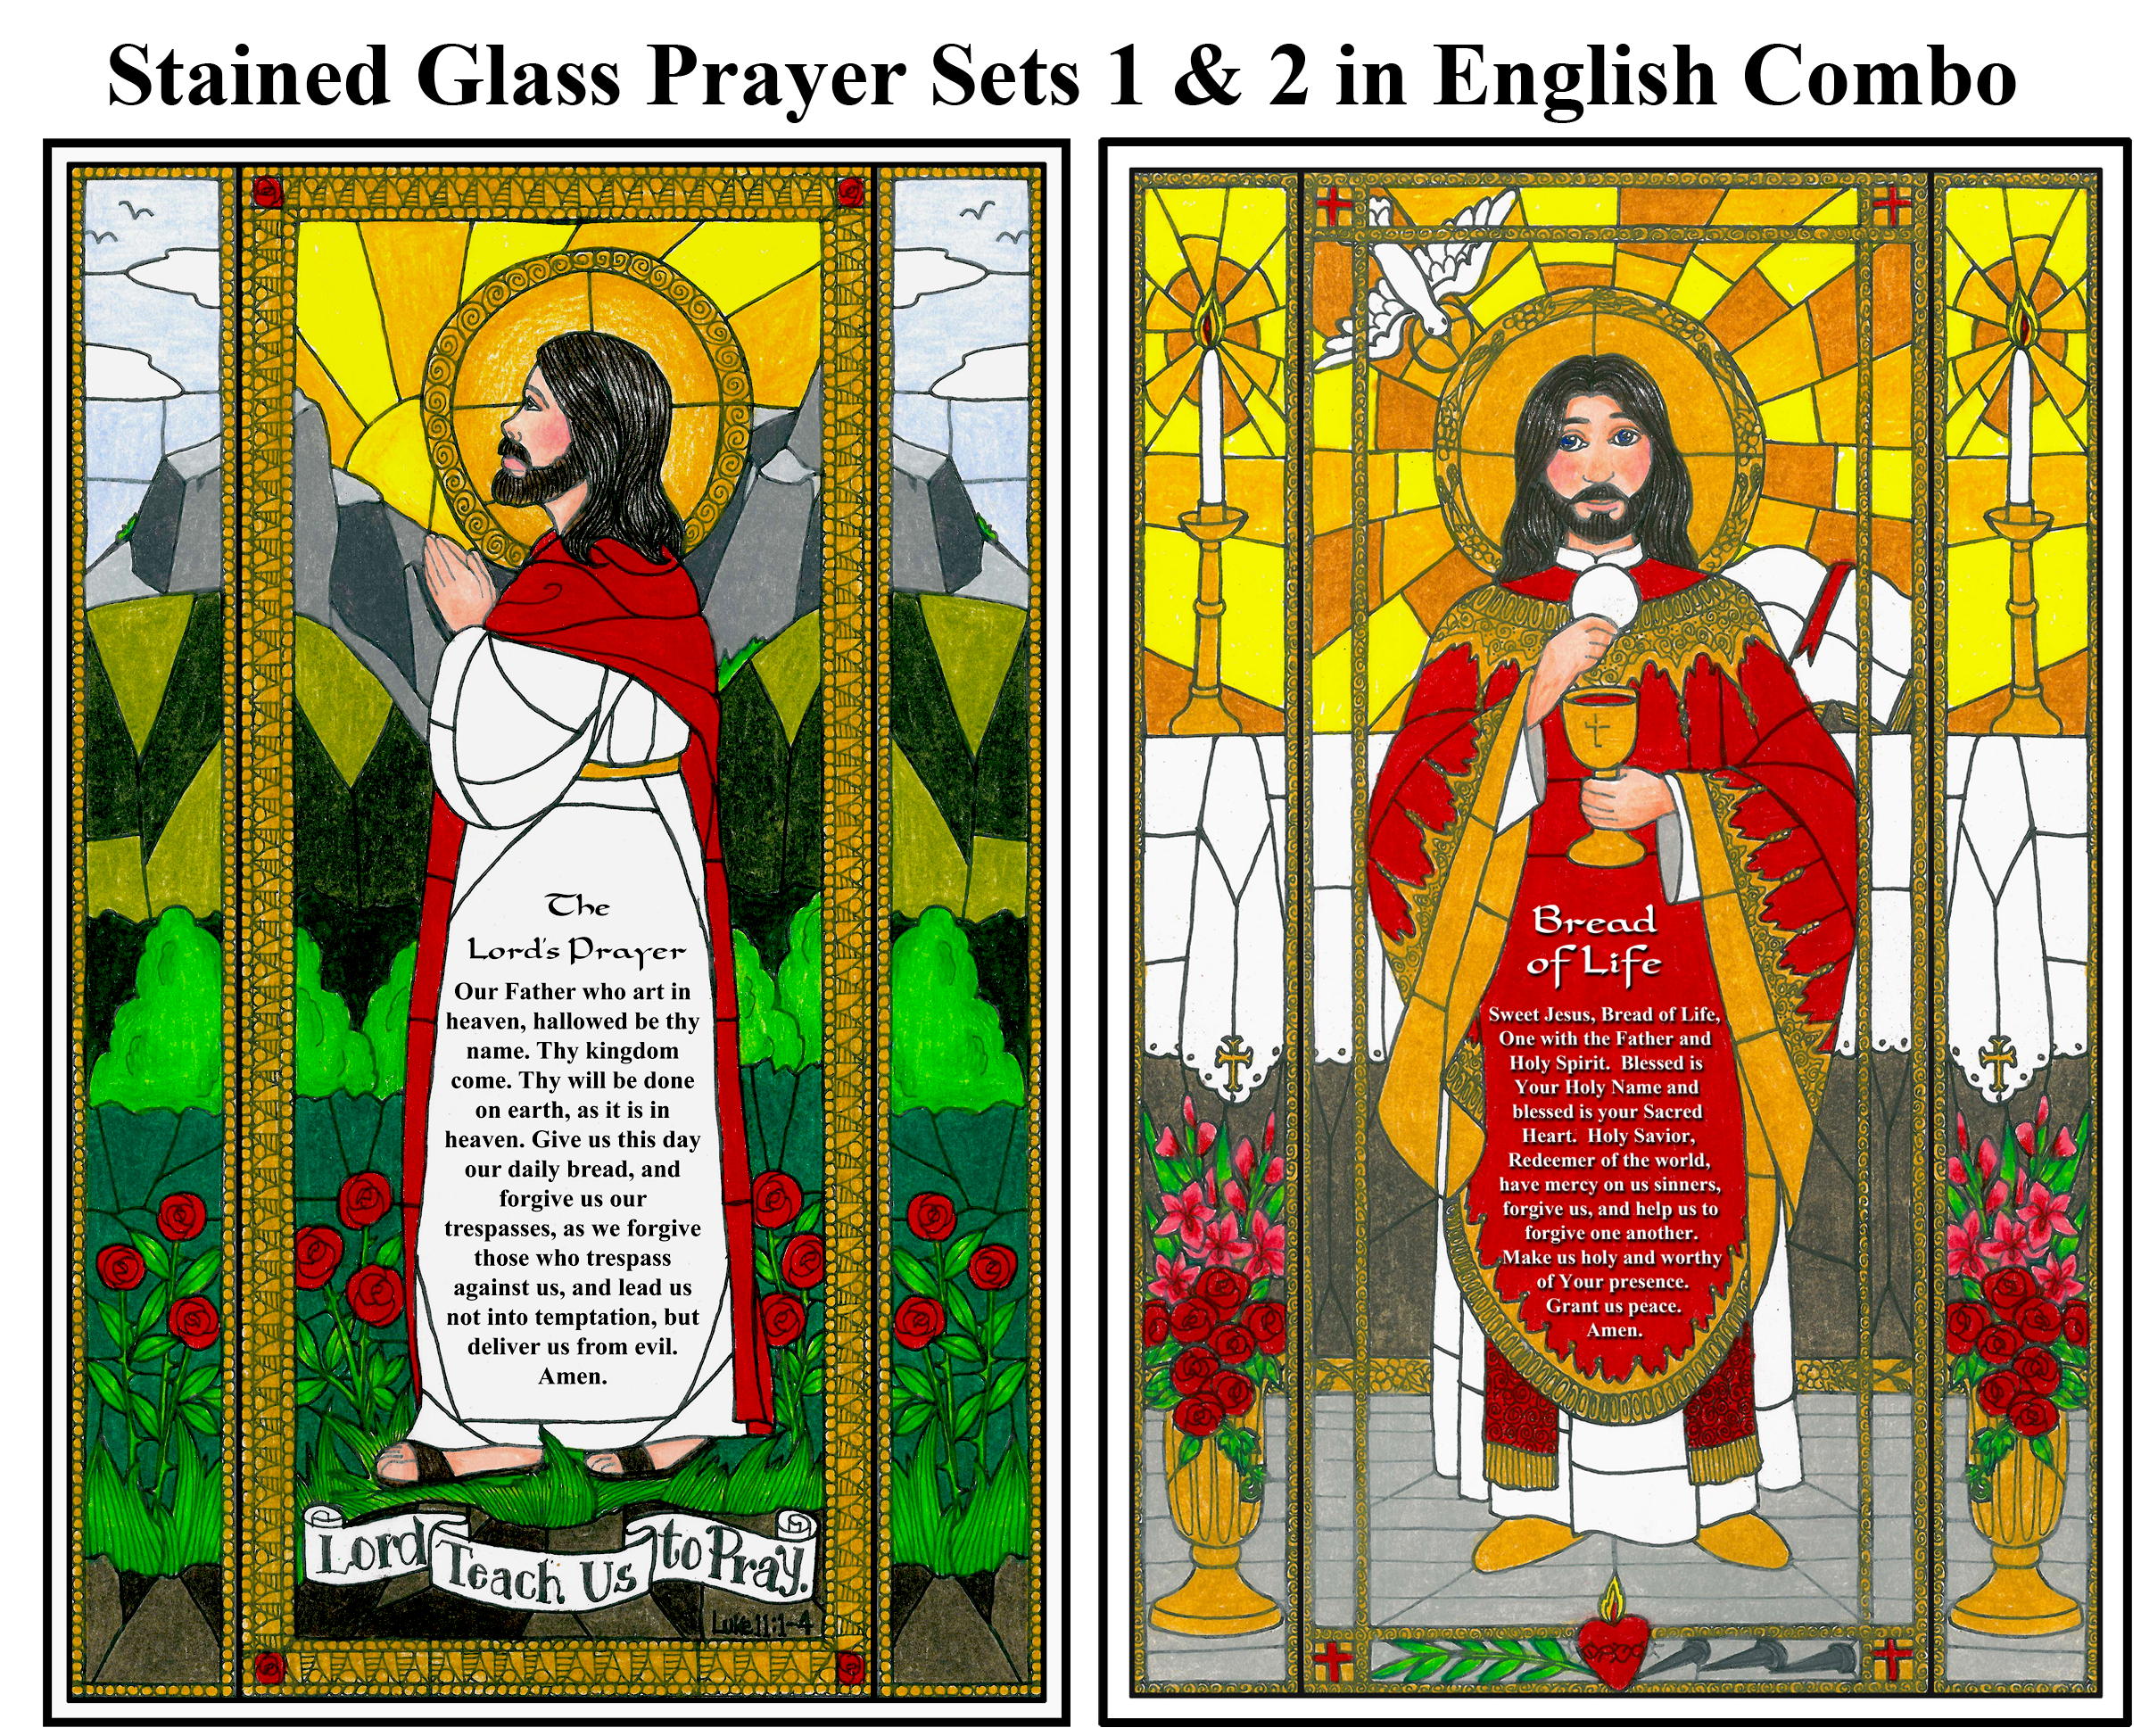 Stained Glass Prayer Set 1 & 2 - English Combo